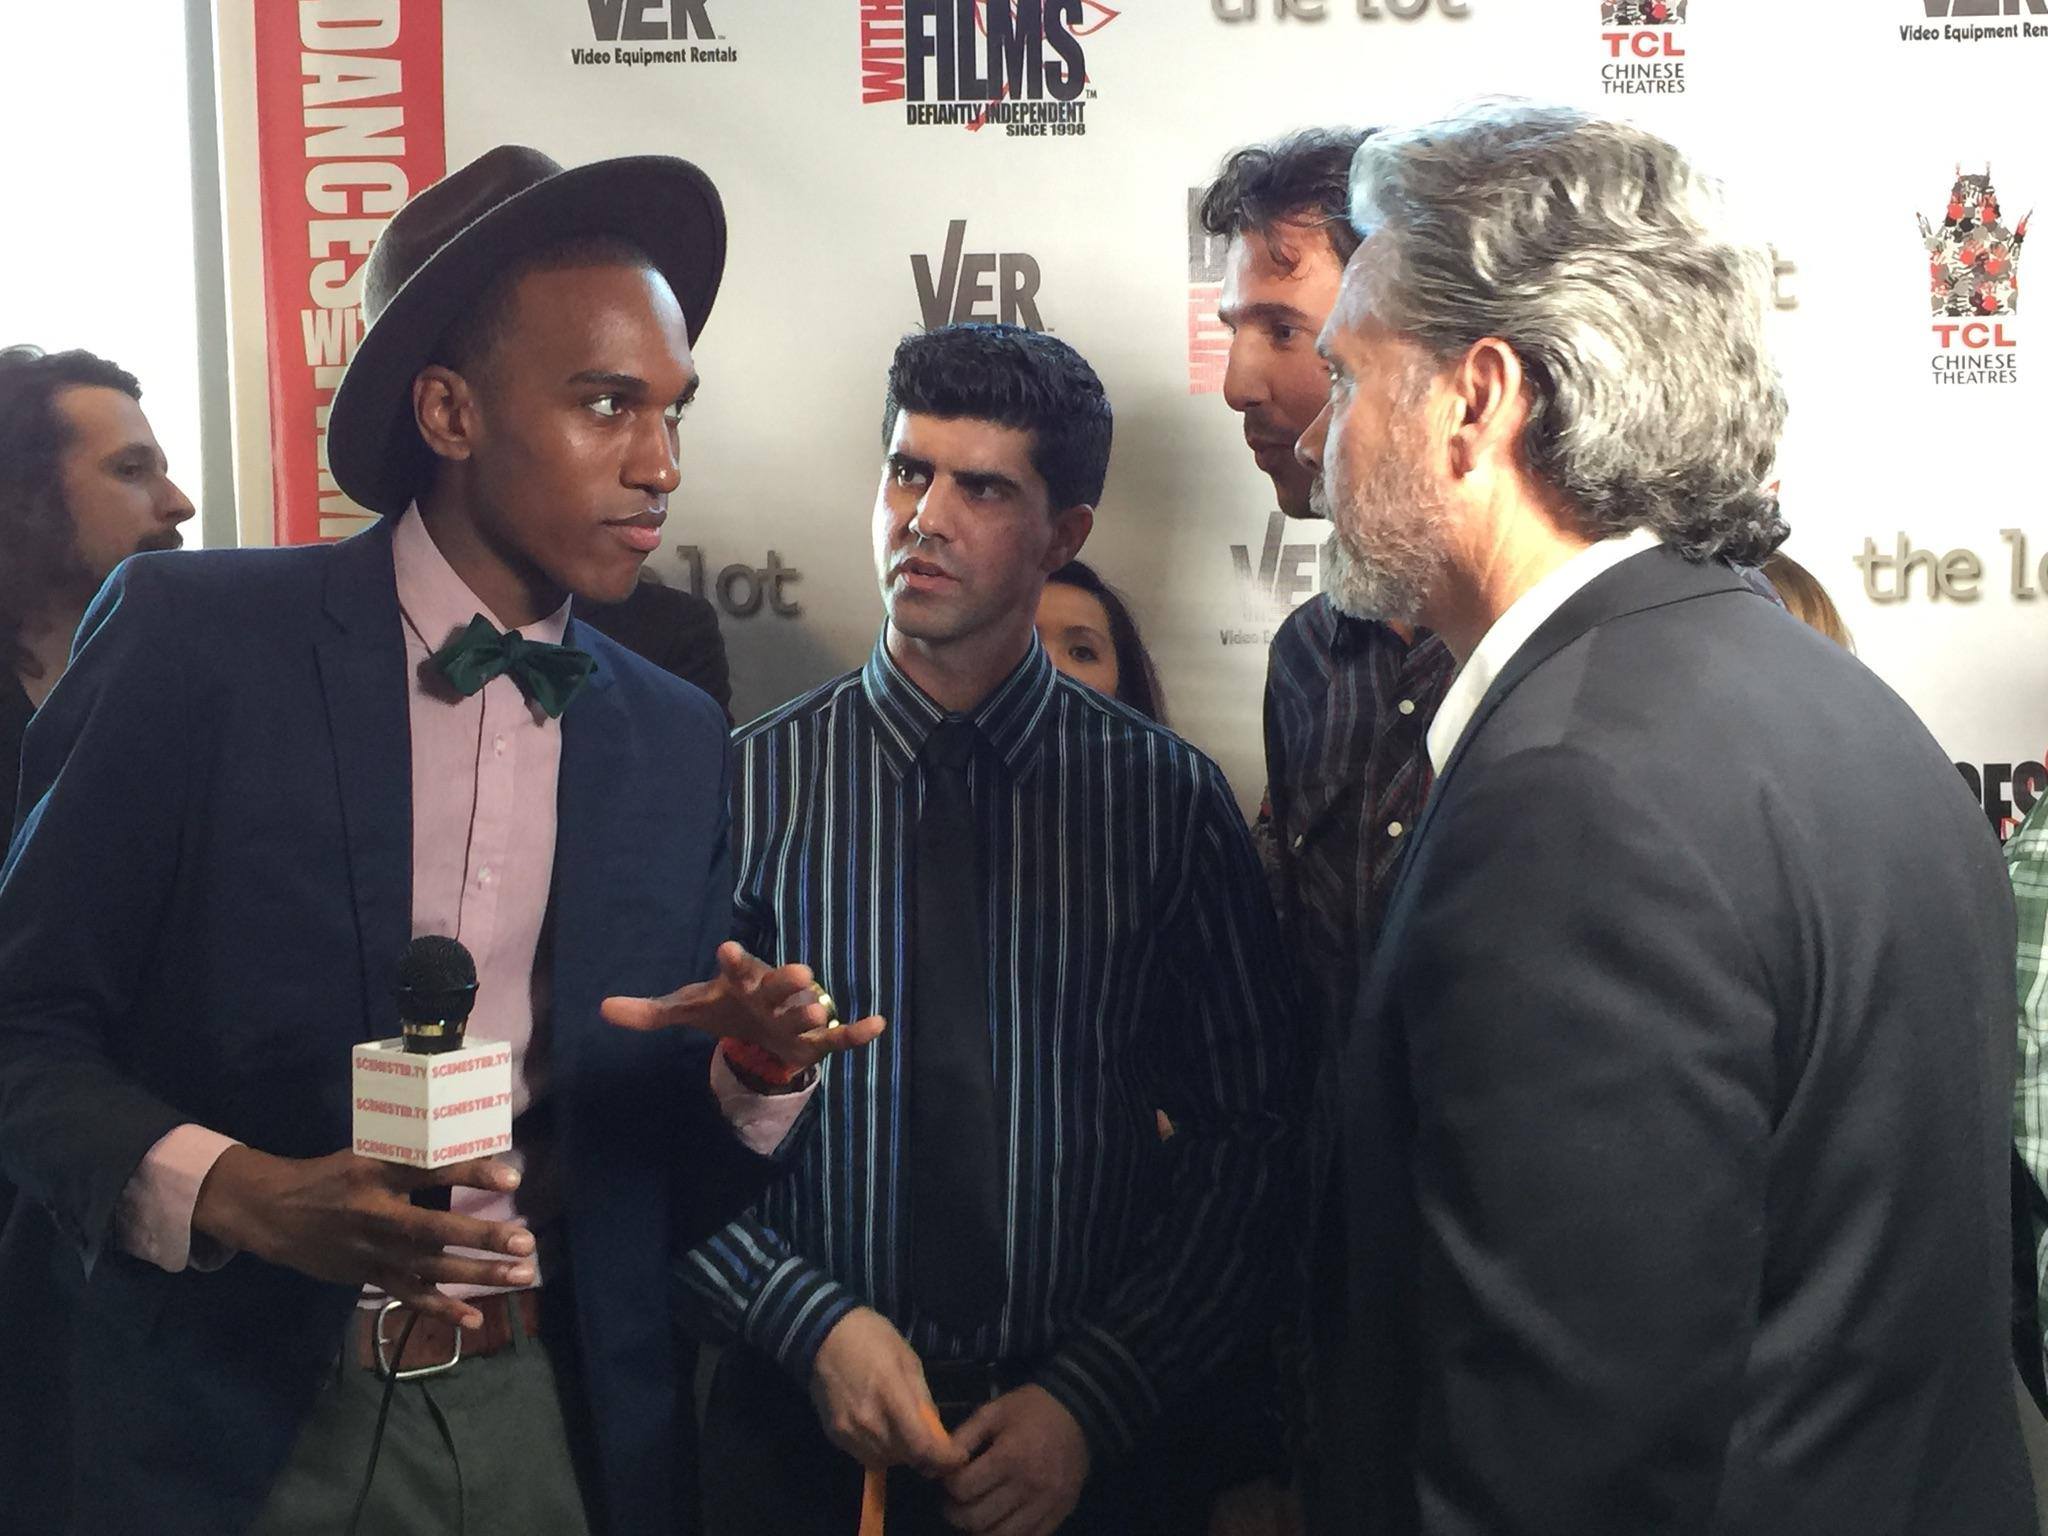 Opening night red carpet interviews at Dances With Films.